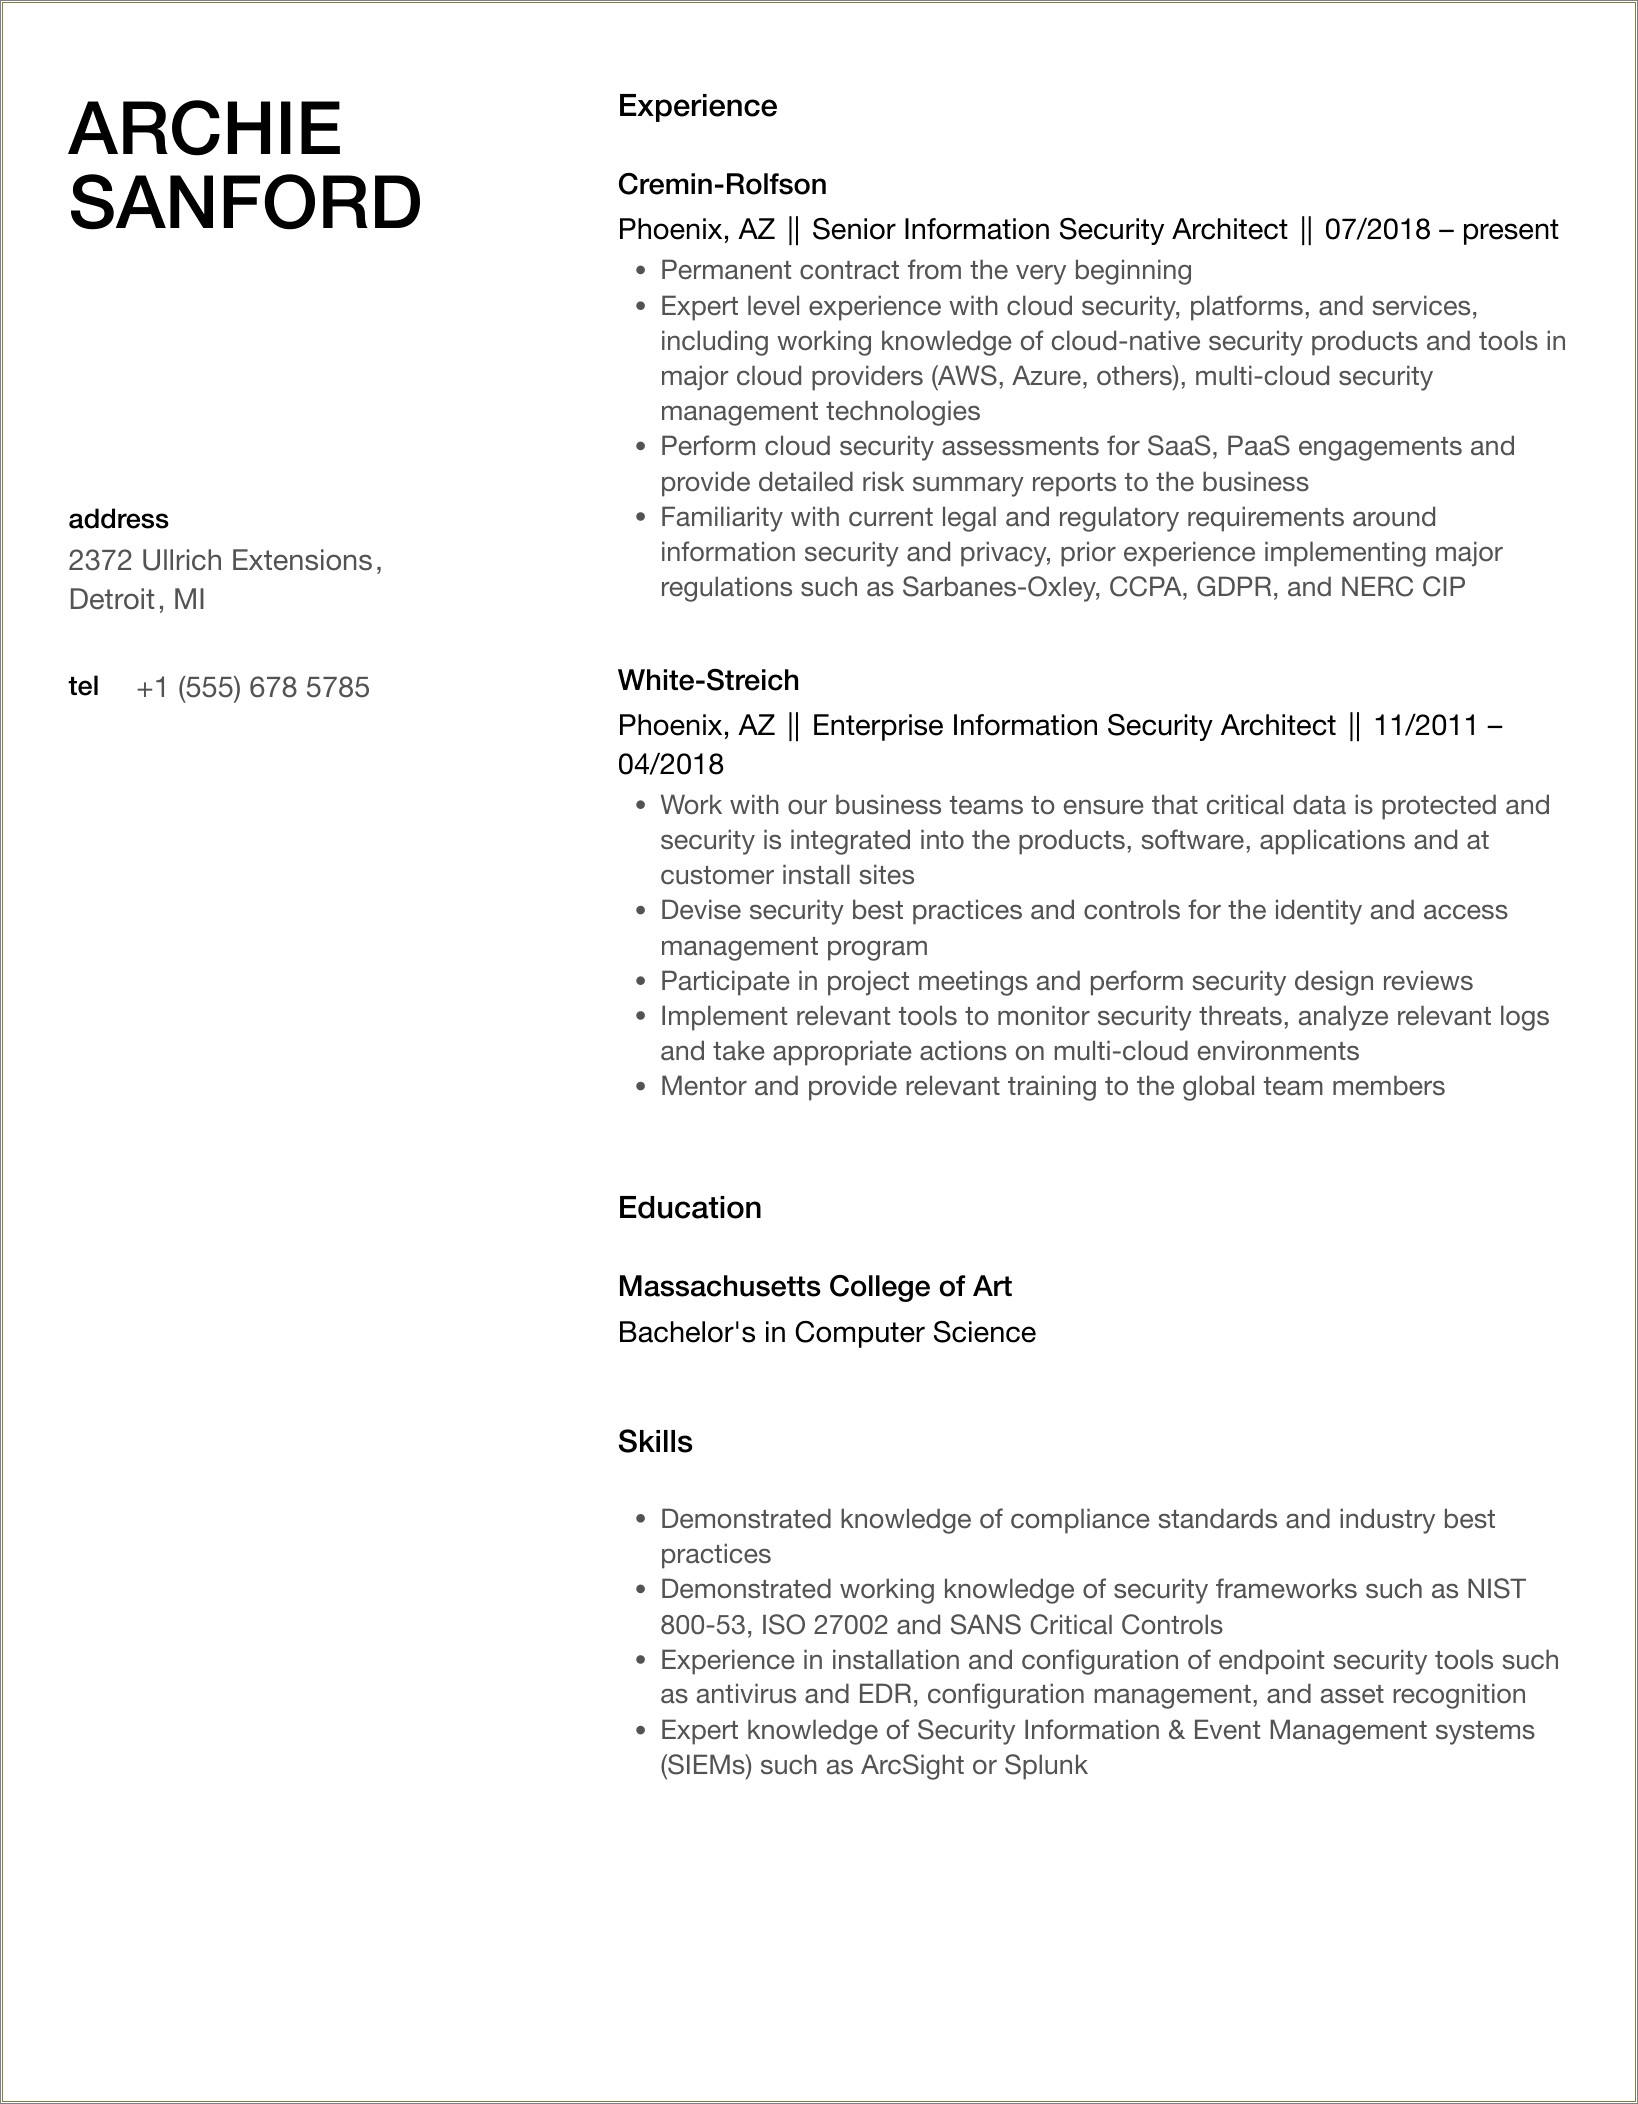 Working Knowledge On Dmz Architecture Resume